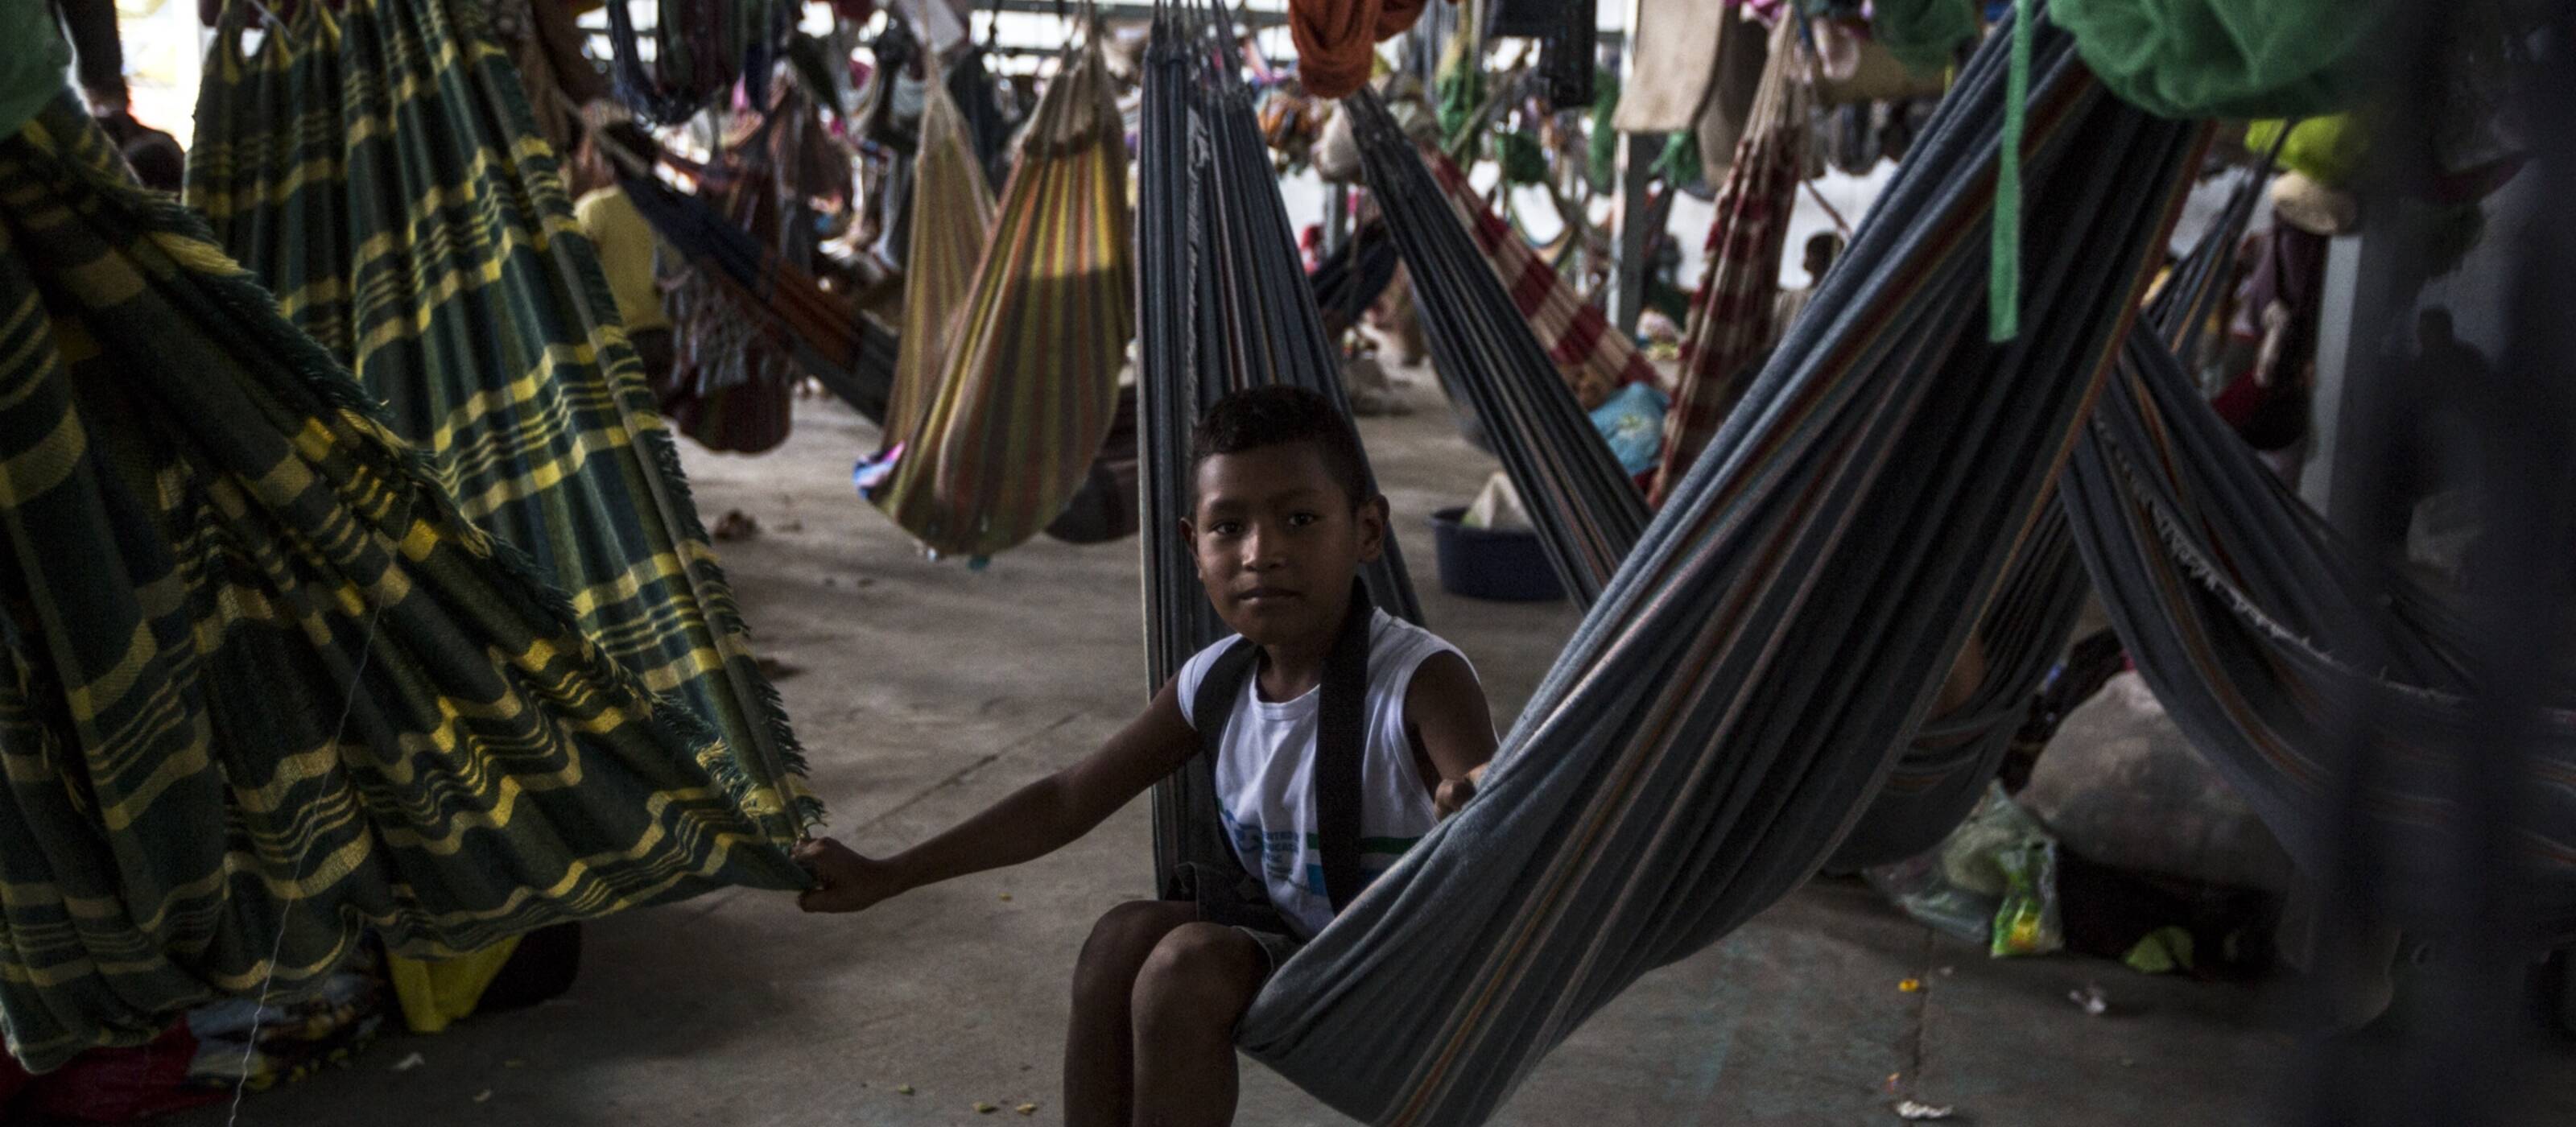 Many people from Venezuela sought refuge in the Brazilian state of Roraima.